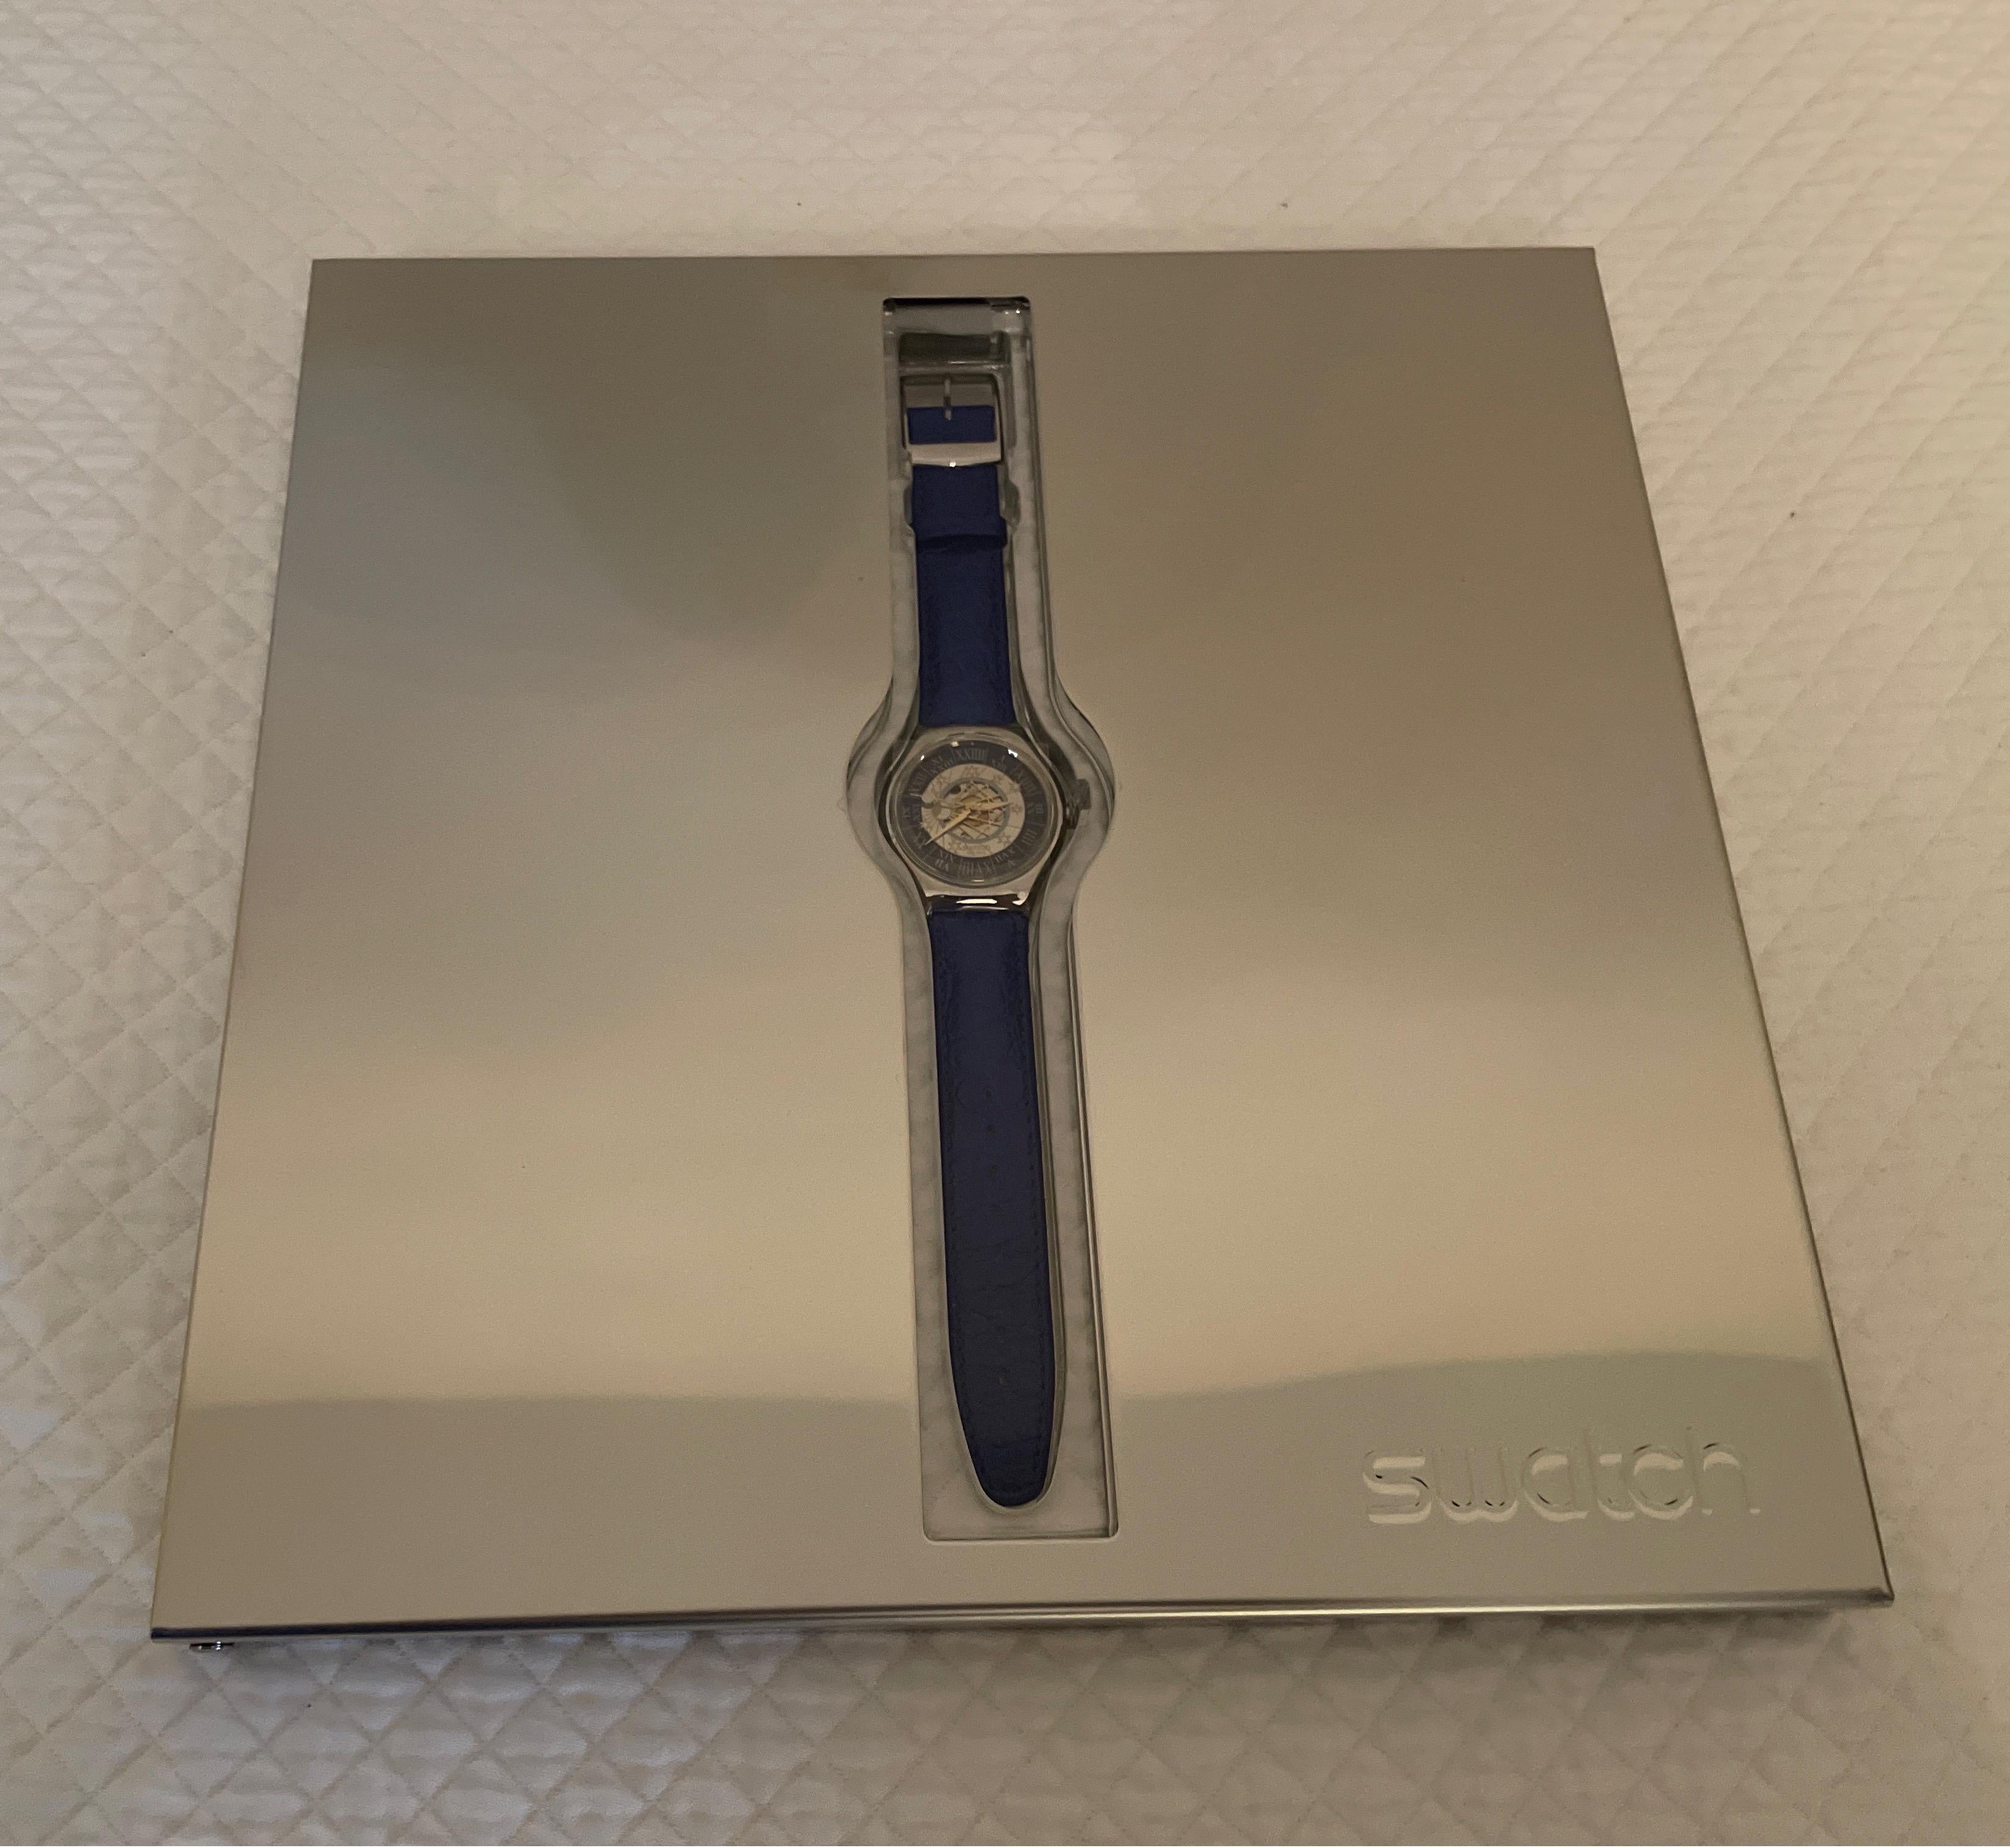 Very rare genuine platinum Swatch Watch made in a limited edition in 1993. This watch was named the Tresor Magique and has an automatic movement. It is in its original packaging and has never been worn. This is a true collector's piece & is truly a